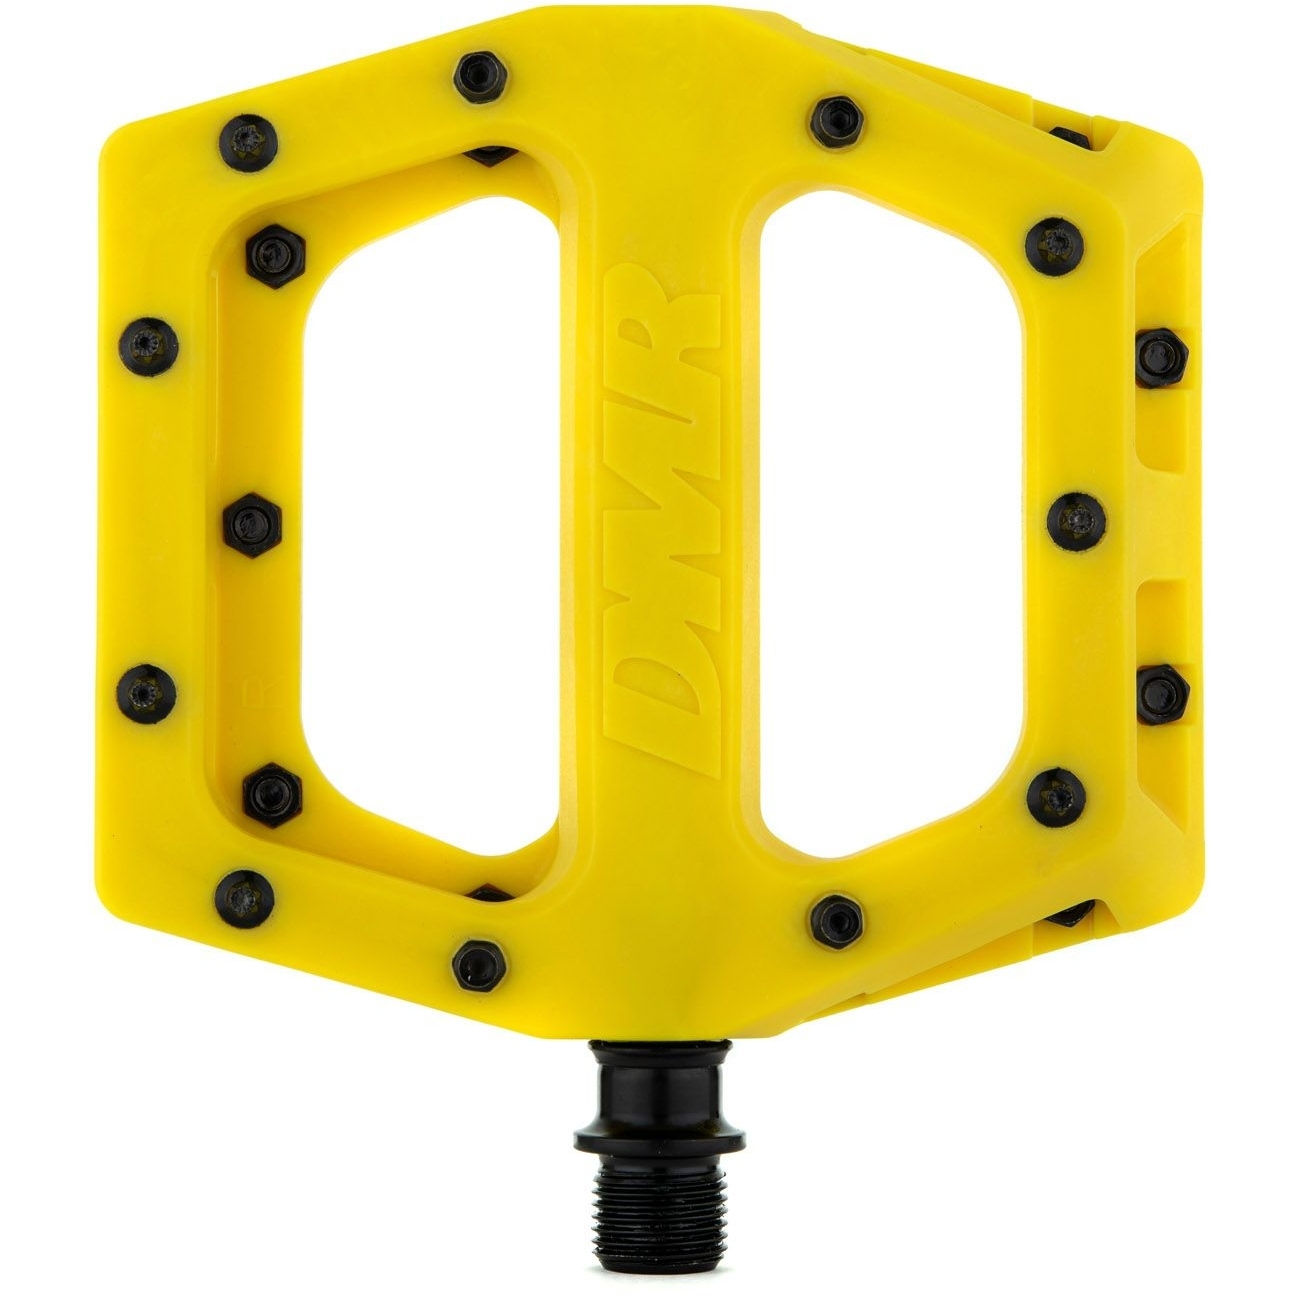 Image of DMR V11 Flat Pedals - yellow